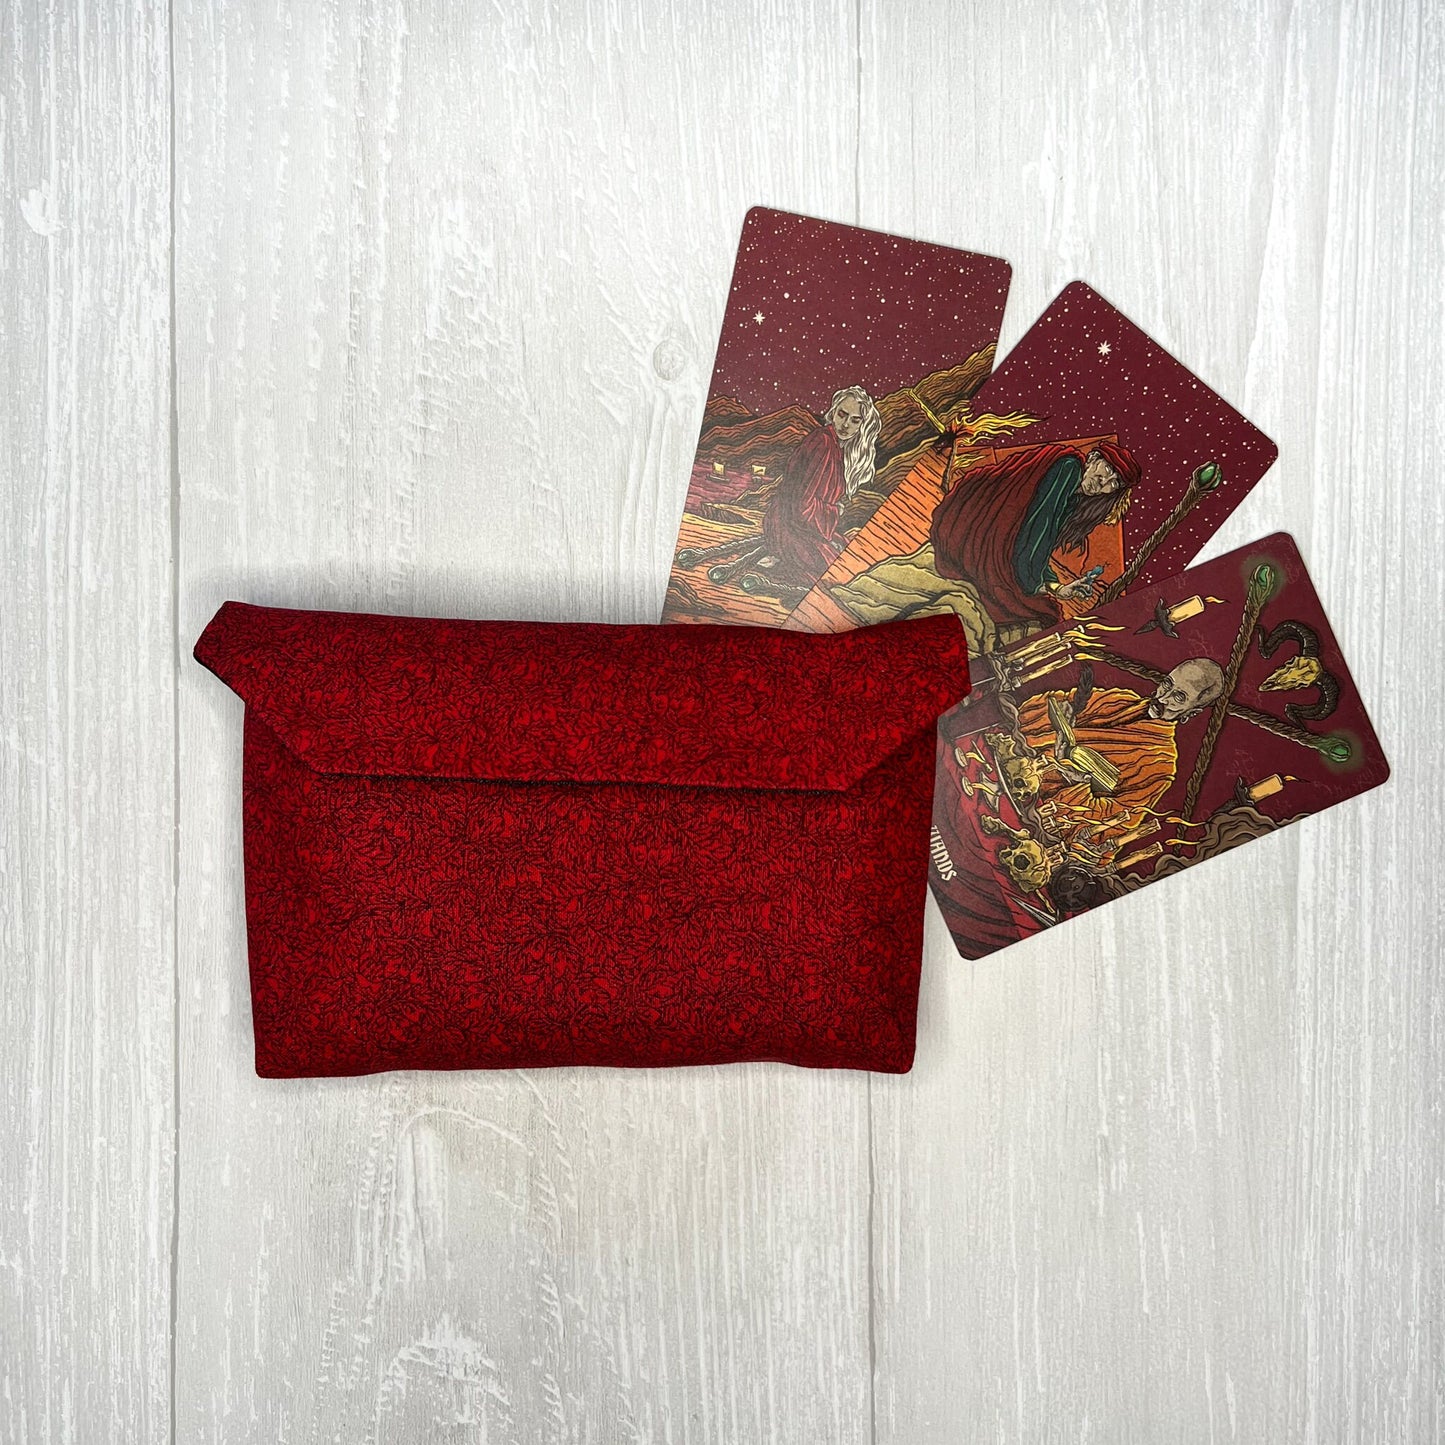 Red Floral Tarot Pouch Clutch, Red Black Magnetic Clasp Pouch, Tarot Bag, Tarot Reading Supplies & Accessories, Tarot Card Storage Holder